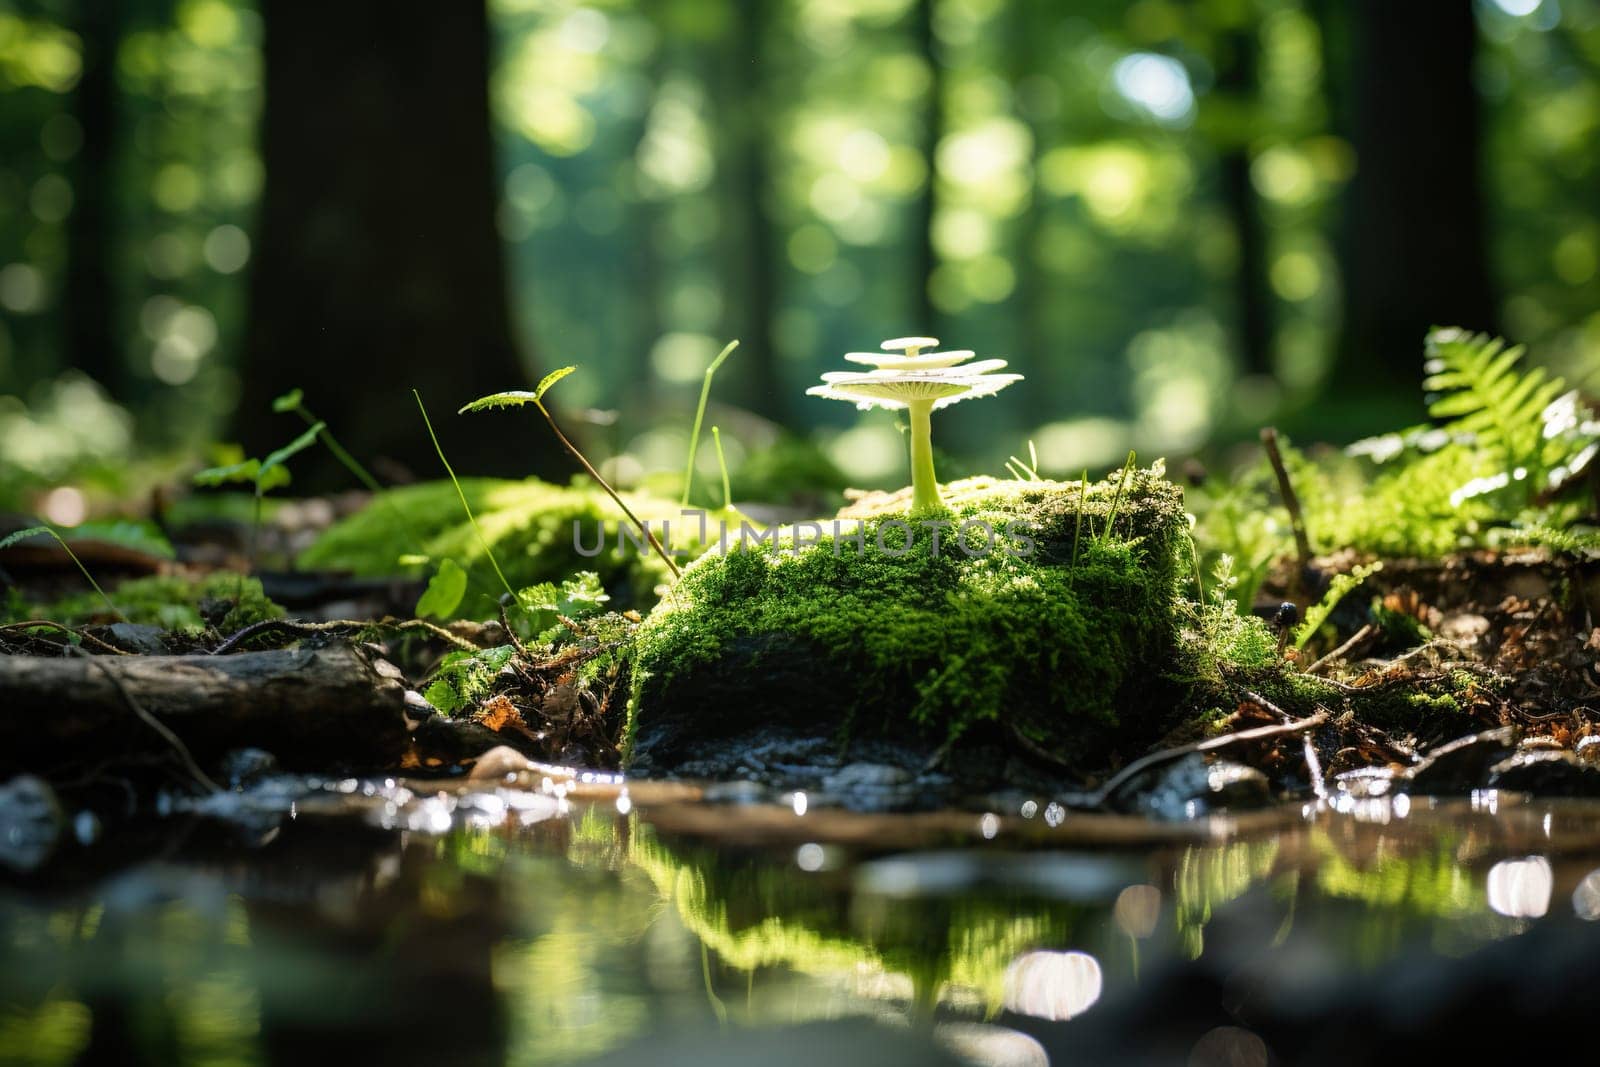 A light mushroom glowing in the rays of the sun on green moss with a blurred forest background.